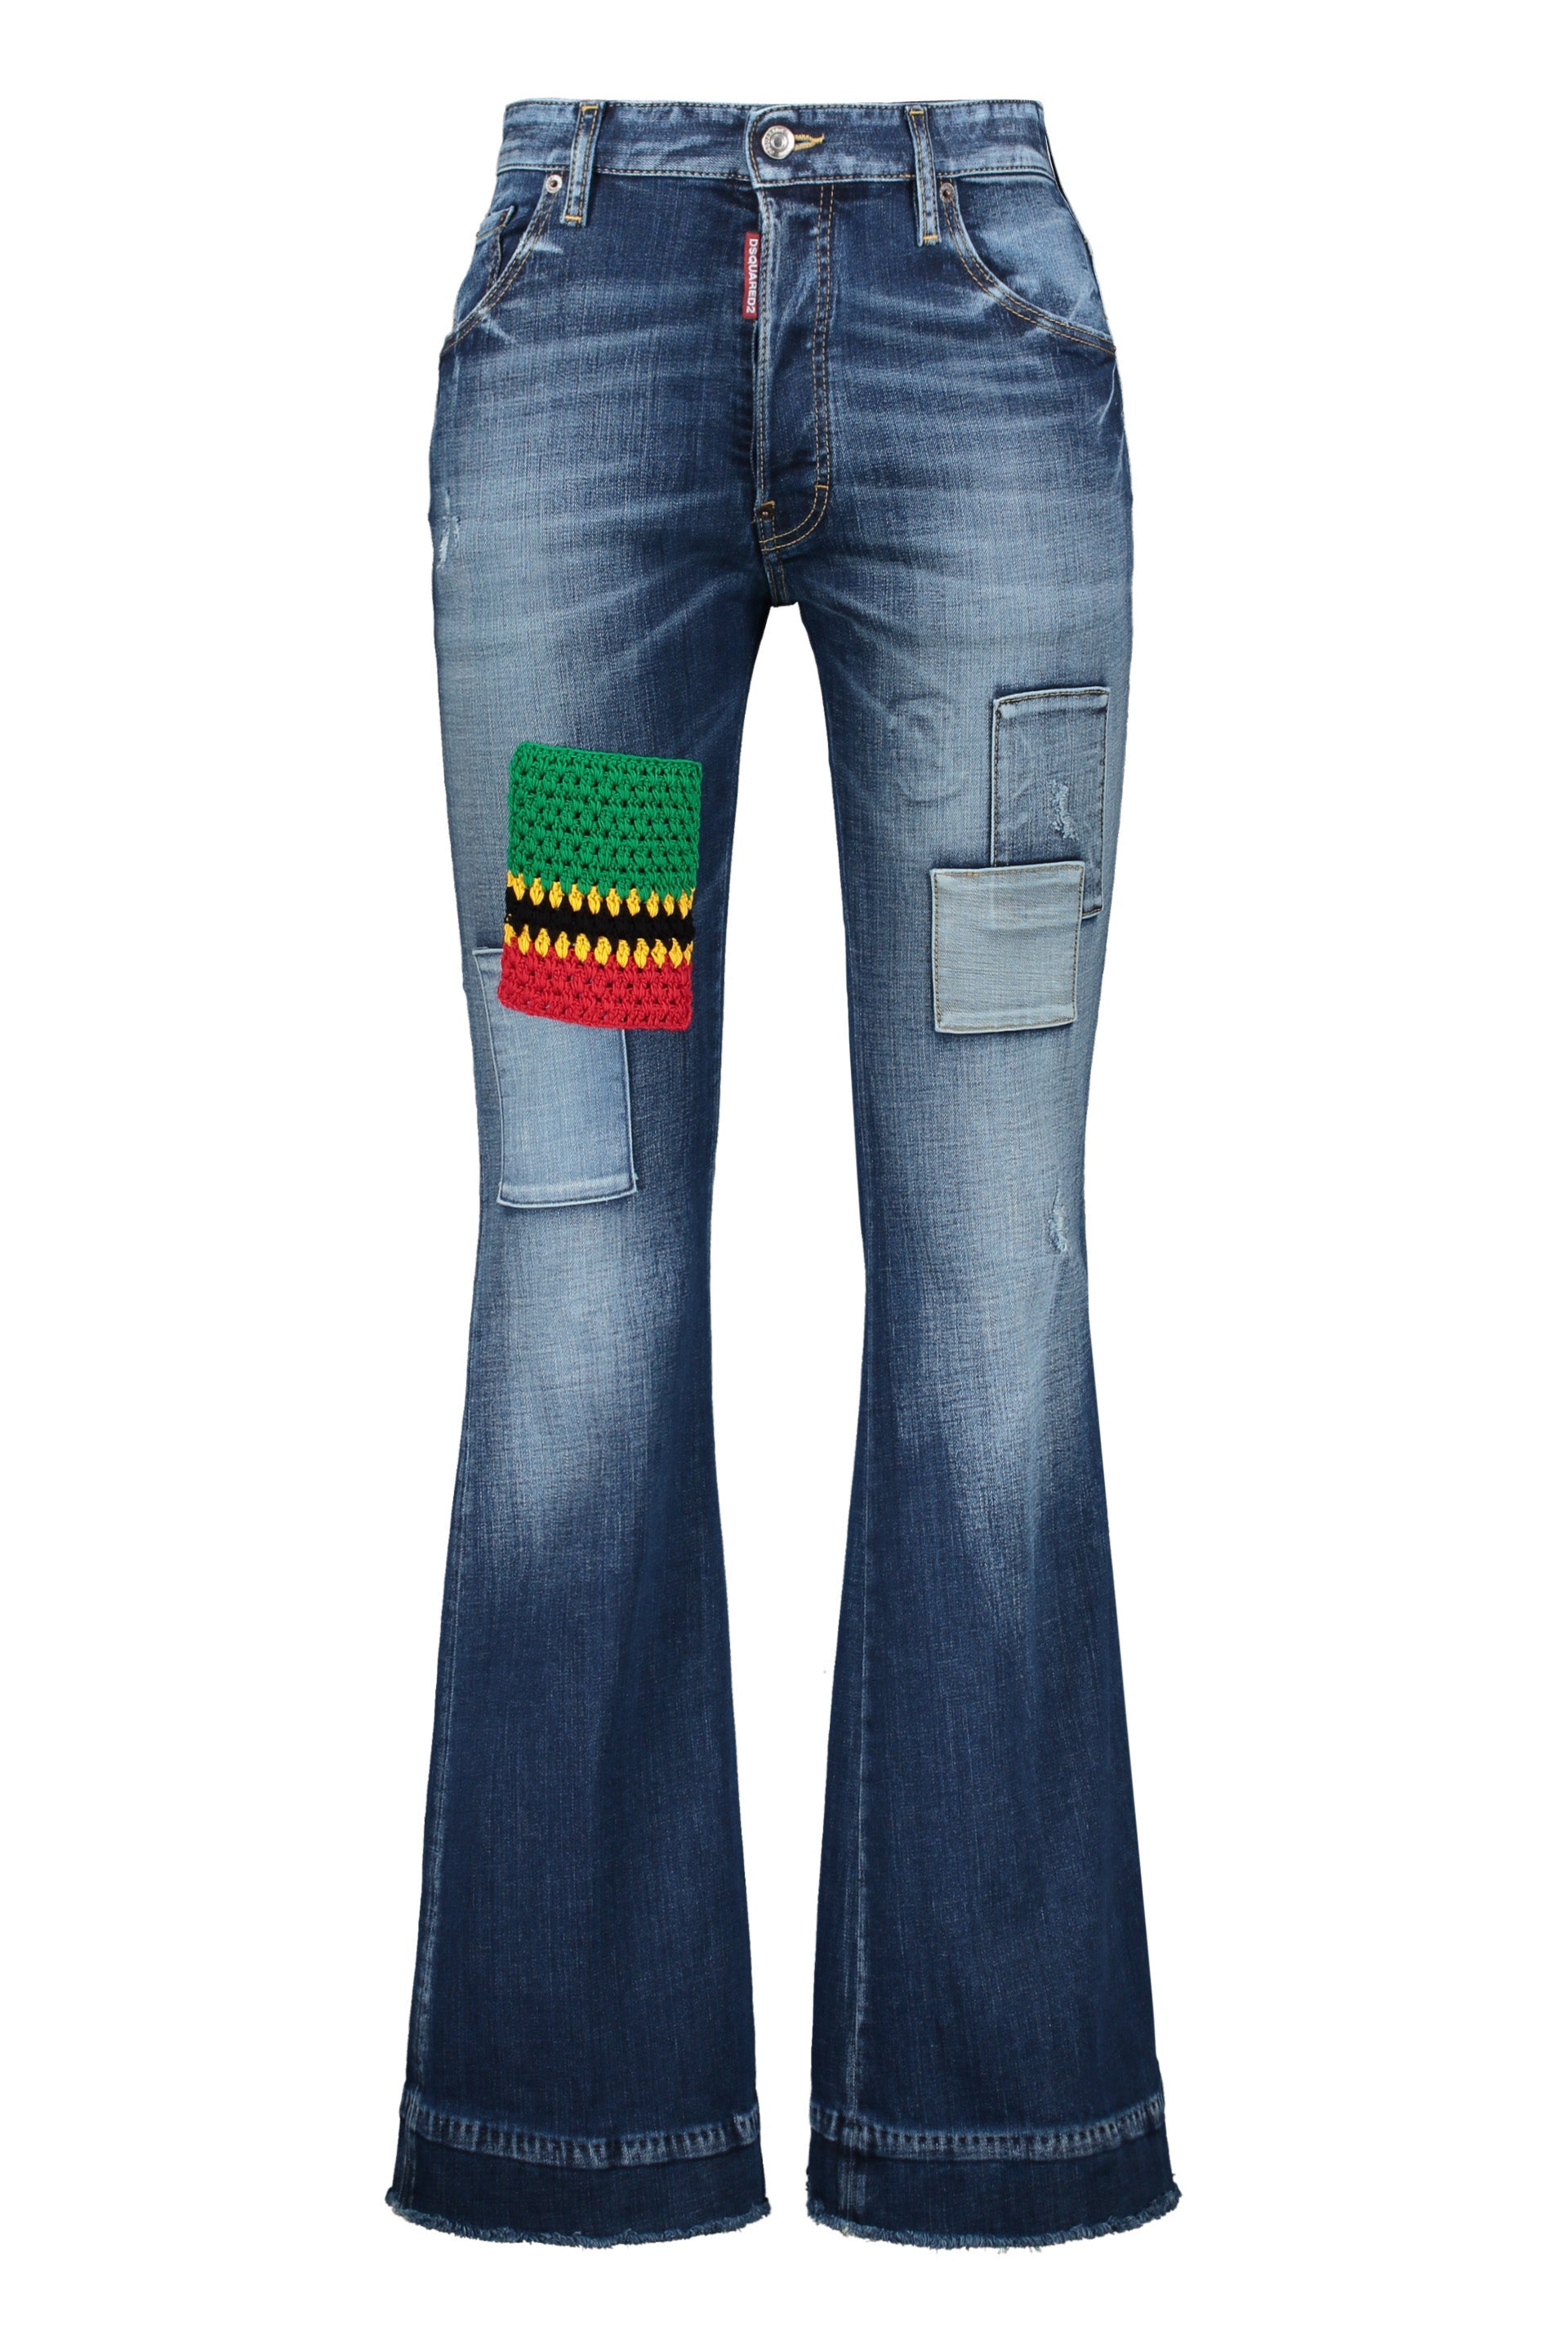 Dsquared2-OUTLET-SALE-Boot-cut-jeans-Jeans-44-ARCHIVE-COLLECTION.jpg